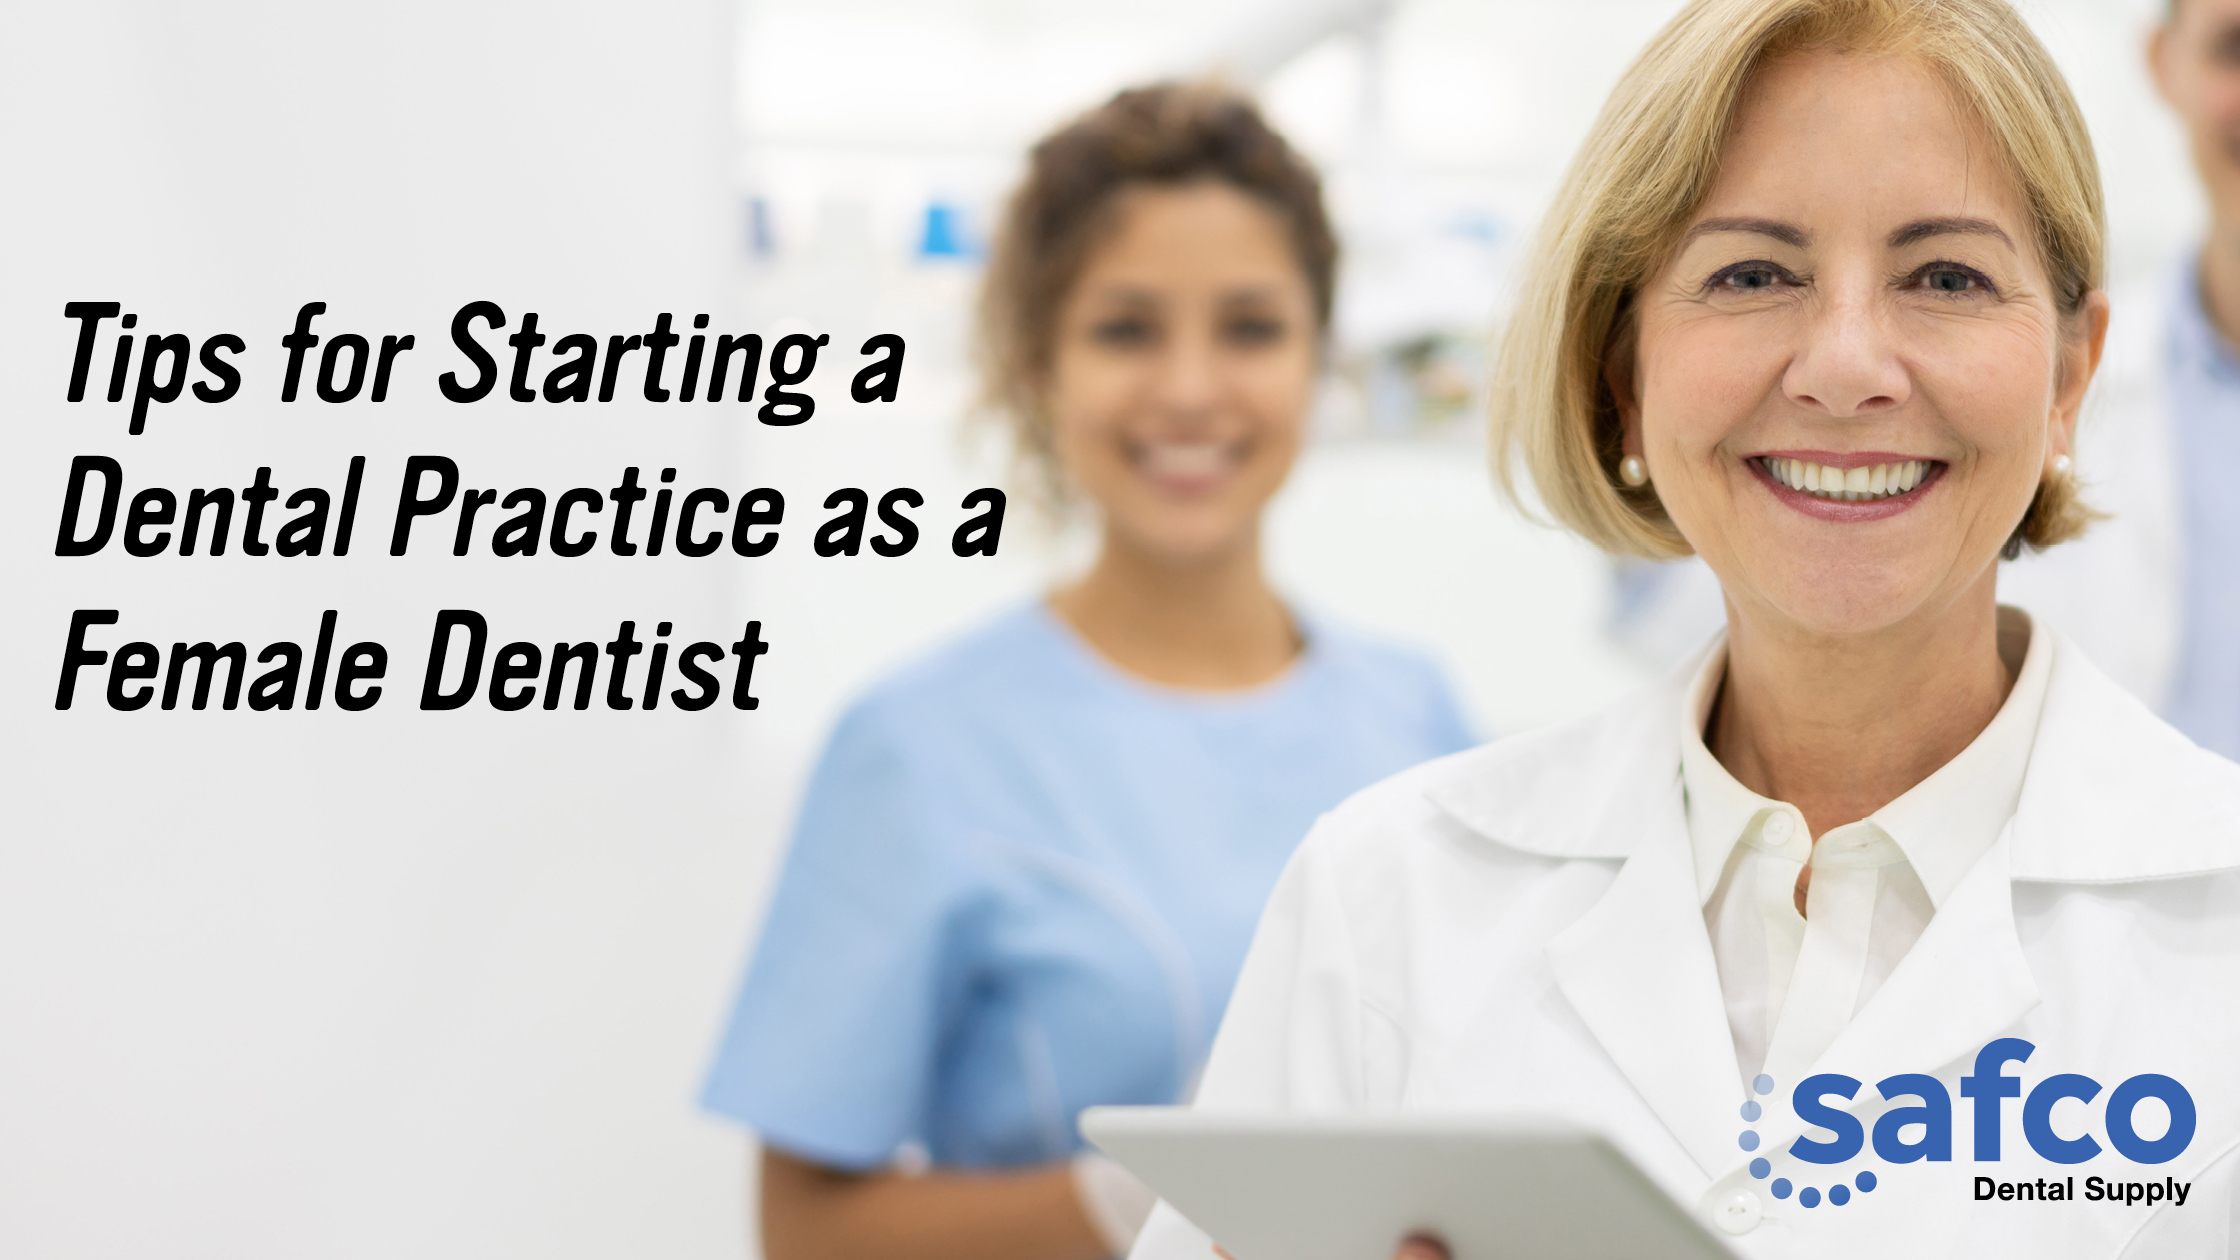 Tips for Starting a Dental Practice as a Female Dentist